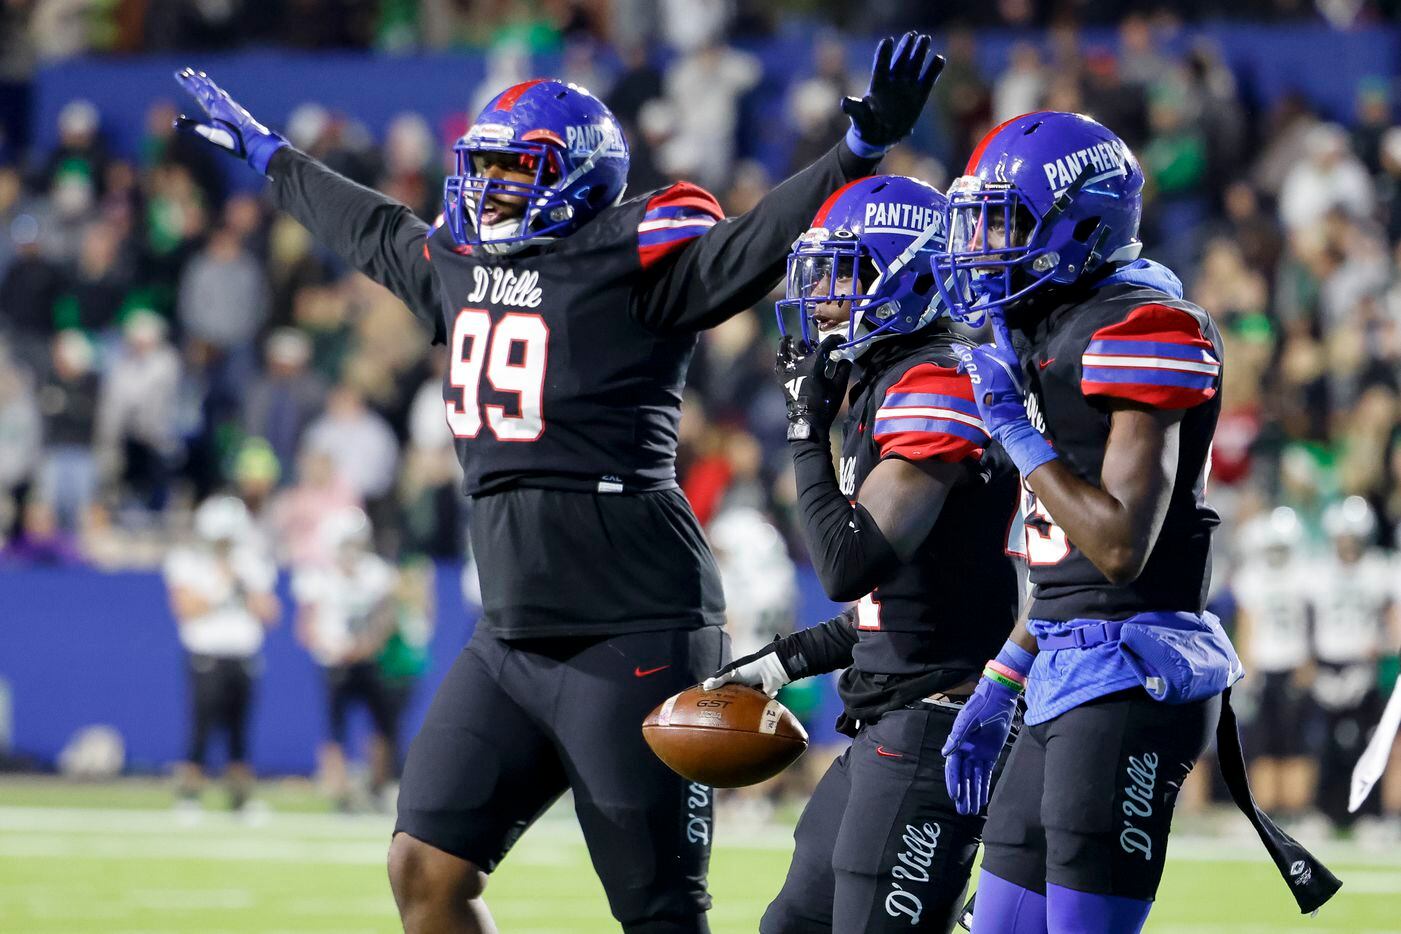 Duncanville defensive lineman Kelson English (99), defensive back Cole Carter (24) and defensive back Sam Roberts (15) celebrate an interception by Carter during the second half of their Class 6A Division I state semifinal playoff game against Southlake Carroll at McKinney ISD Stadium in McKinney, Texas, Saturday, Dec. 11, 2021. Duncanville defeated Southlake Carroll 35-9. (Elias Valverde II/The Dallas Morning News)